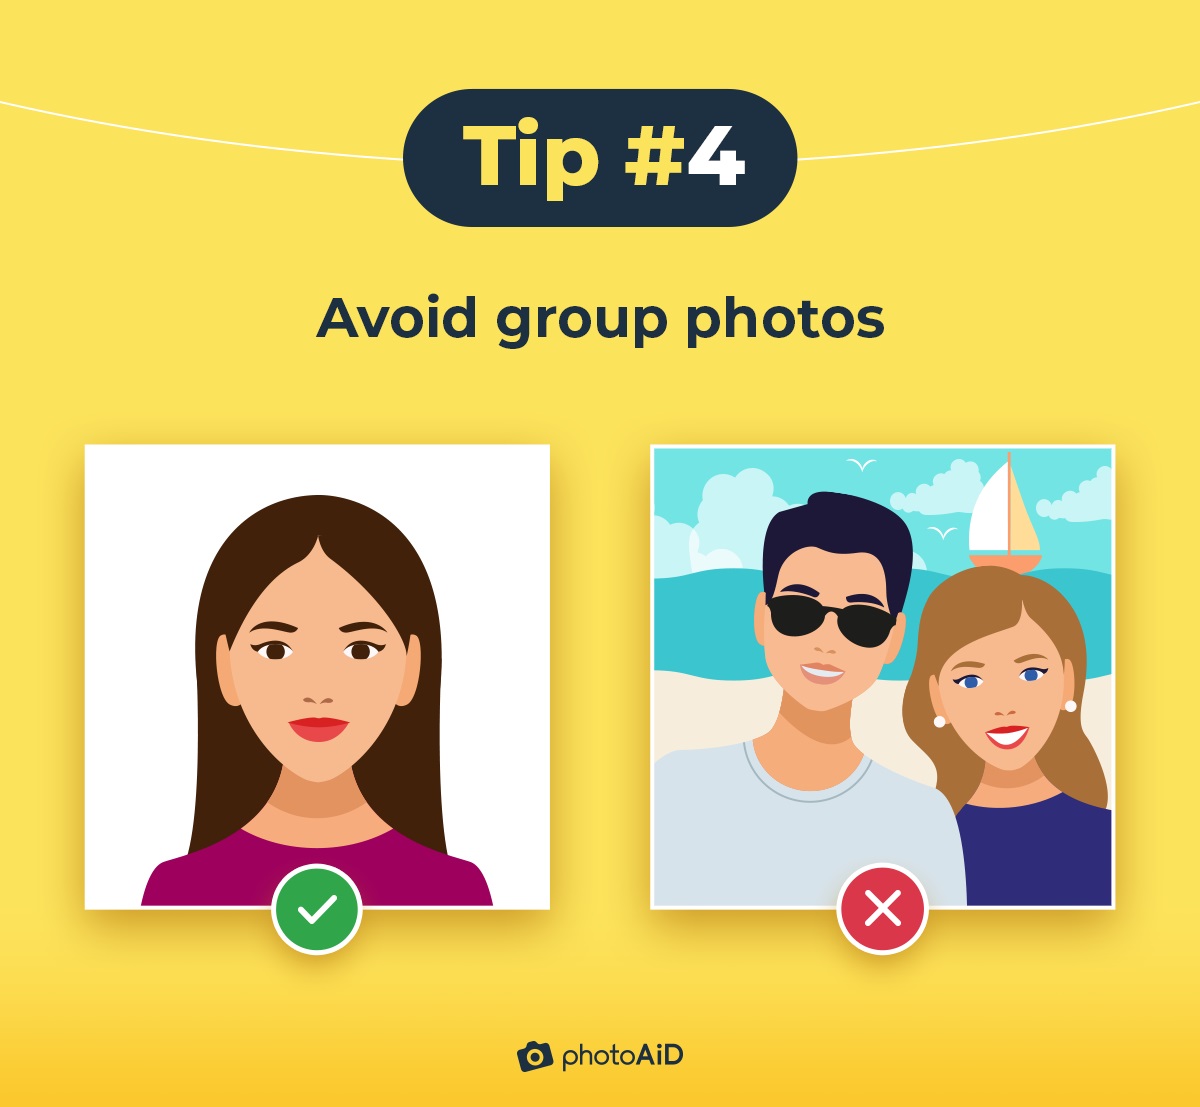 A tip on LinkedIn profile pictures advising against adding group photos.